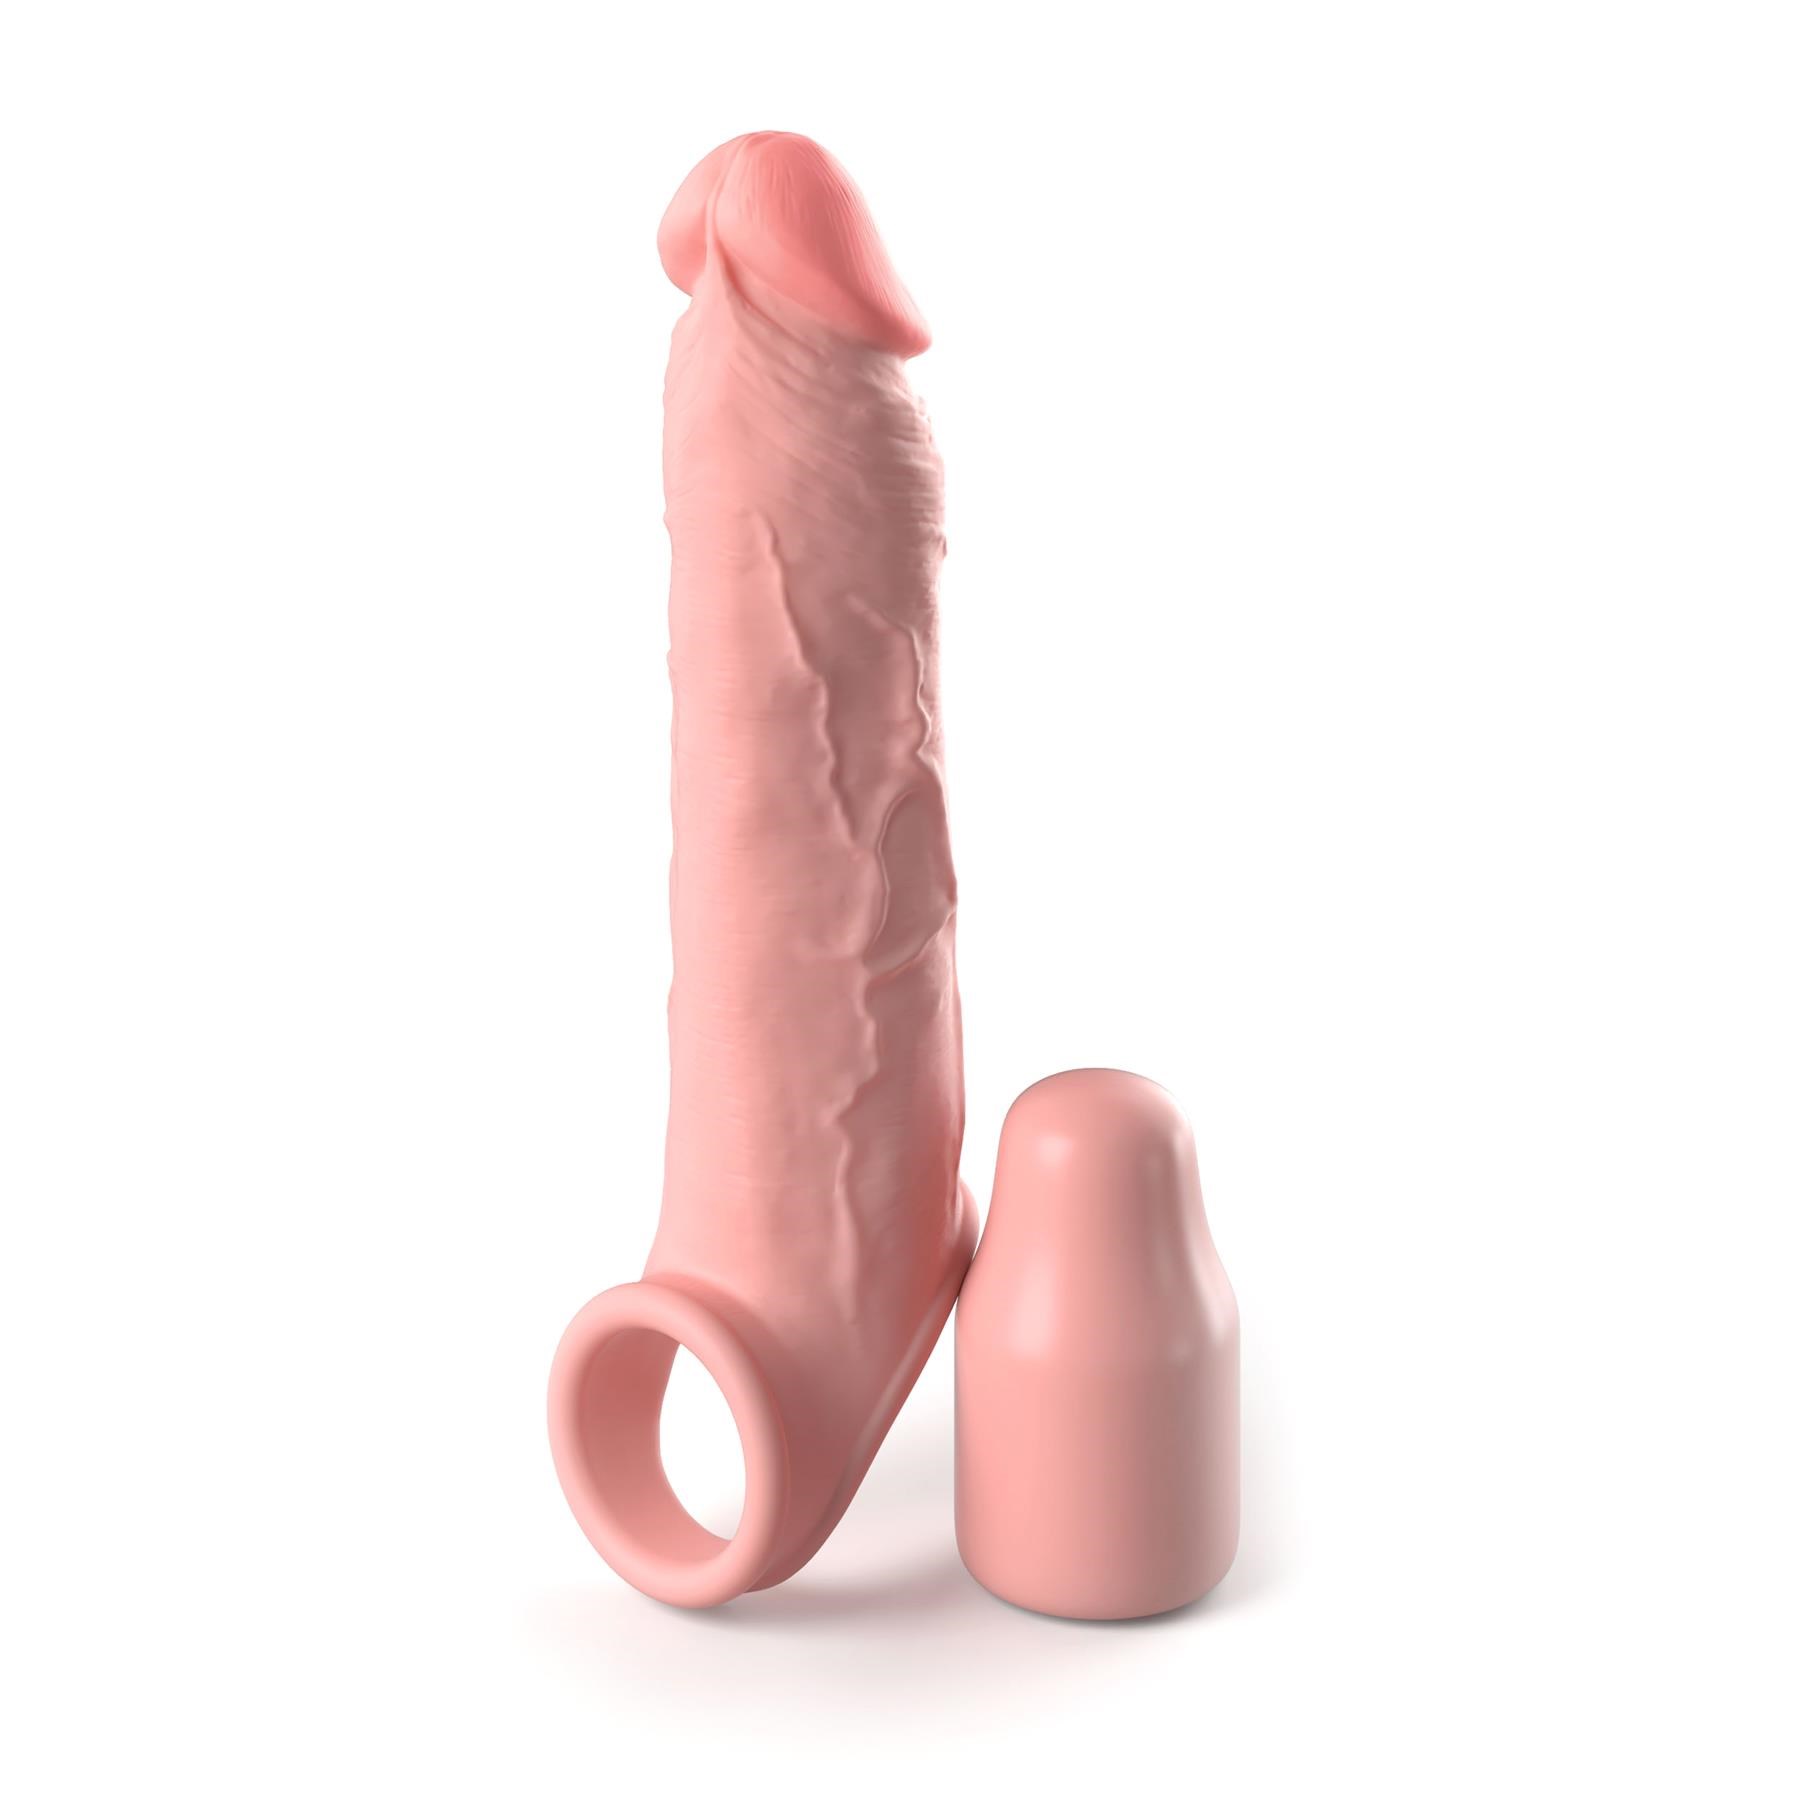 Fantasy X-Tensions Elite 2" Silicone Extension With Strap - Product Shot